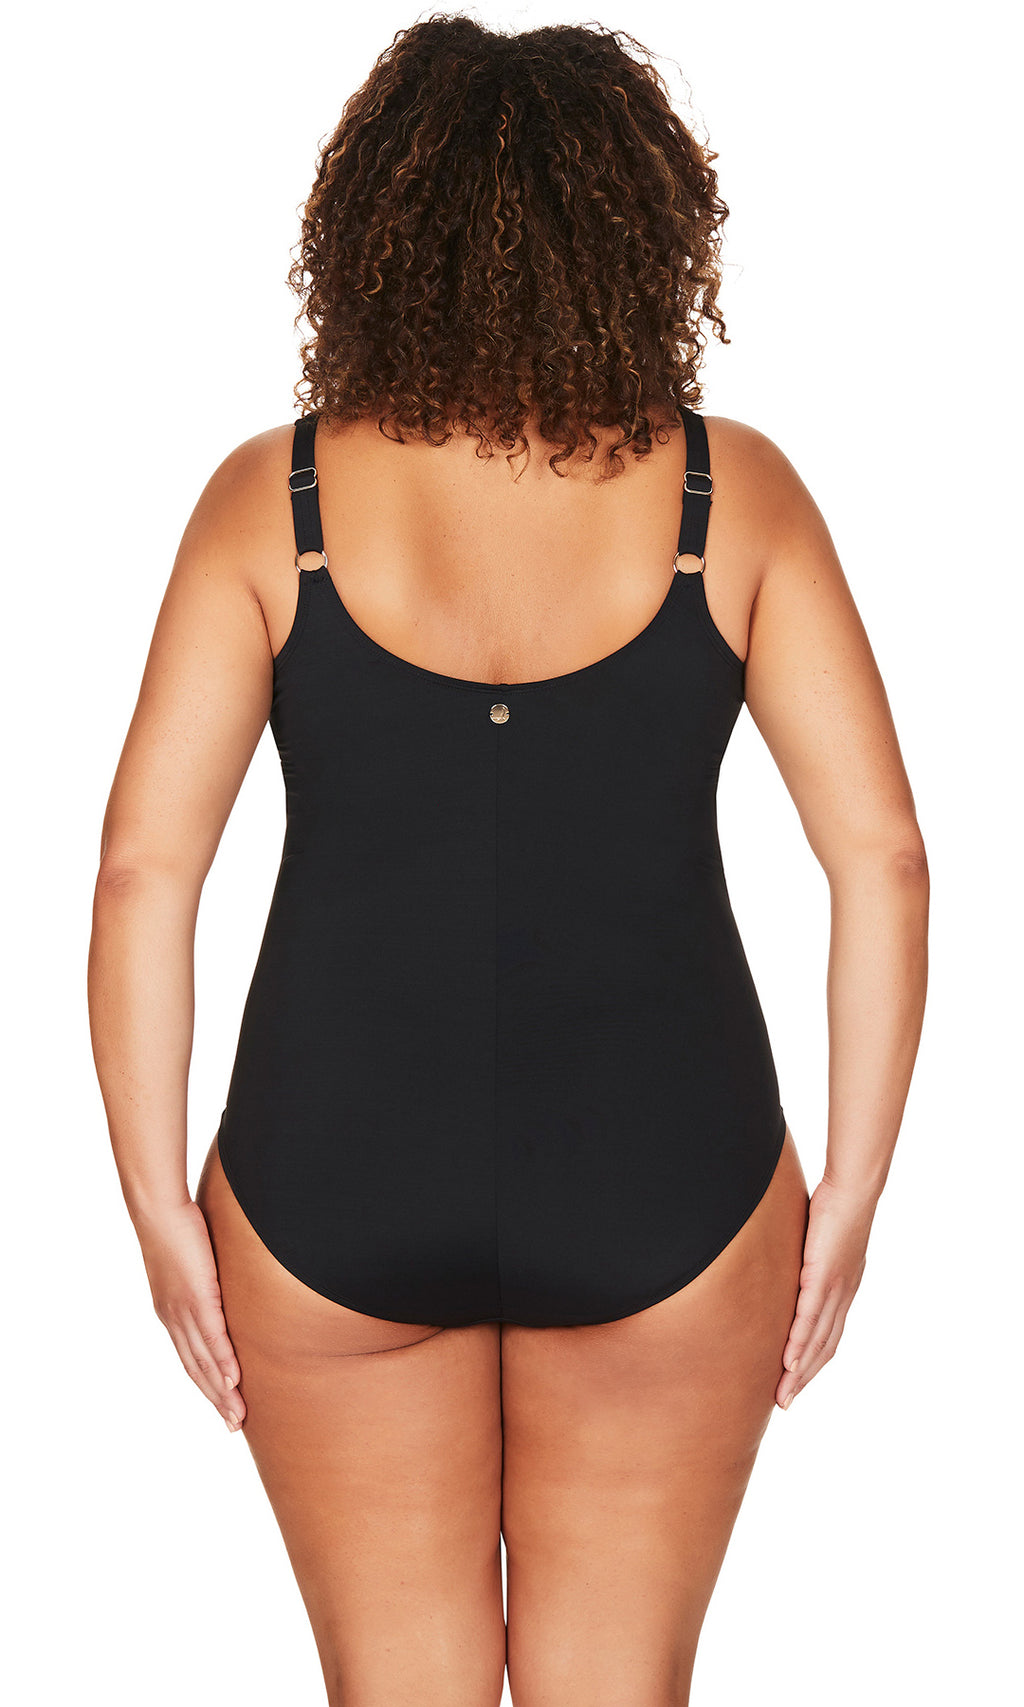 Cross Front One Piece Hues Black Delacroix, Multifit D Cup to G Cup